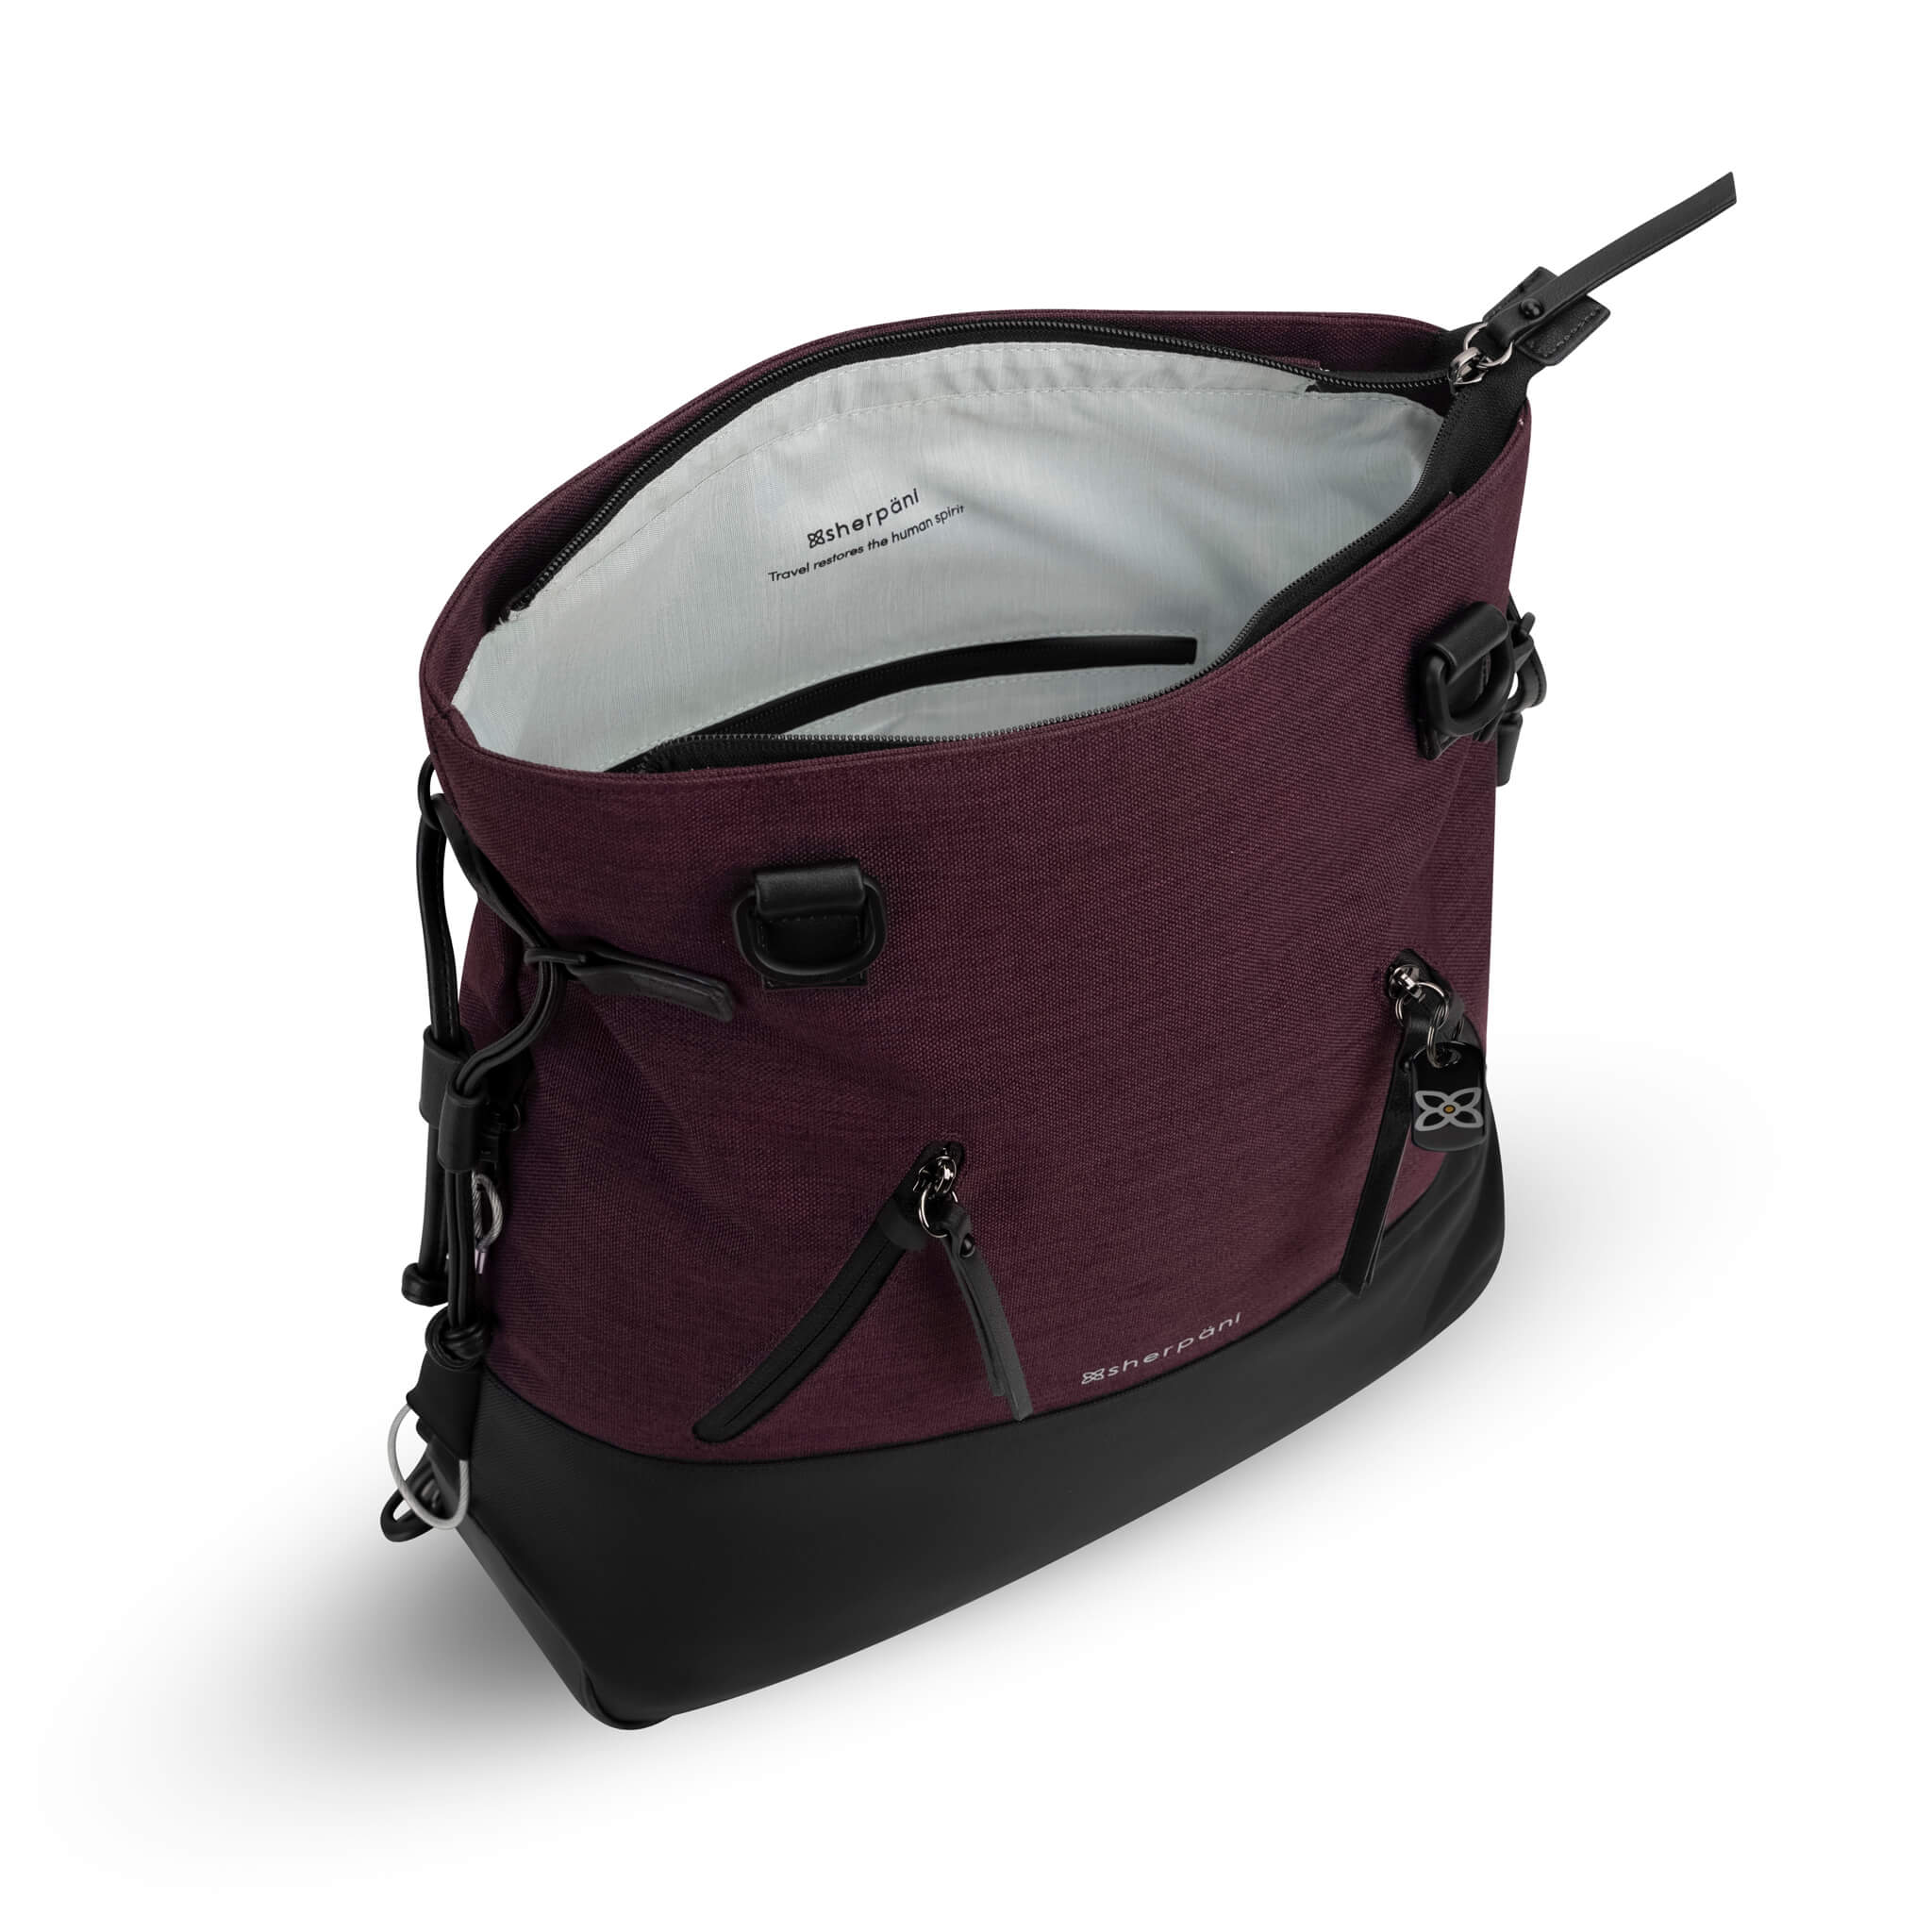 Inside view of Sherpani Anti-Theft backpack tote, the Tempest in Merlot. The main compartment is open to reveal Sherpani logo and the words "Travel restores the human spirit" printed on the light gray interior. 